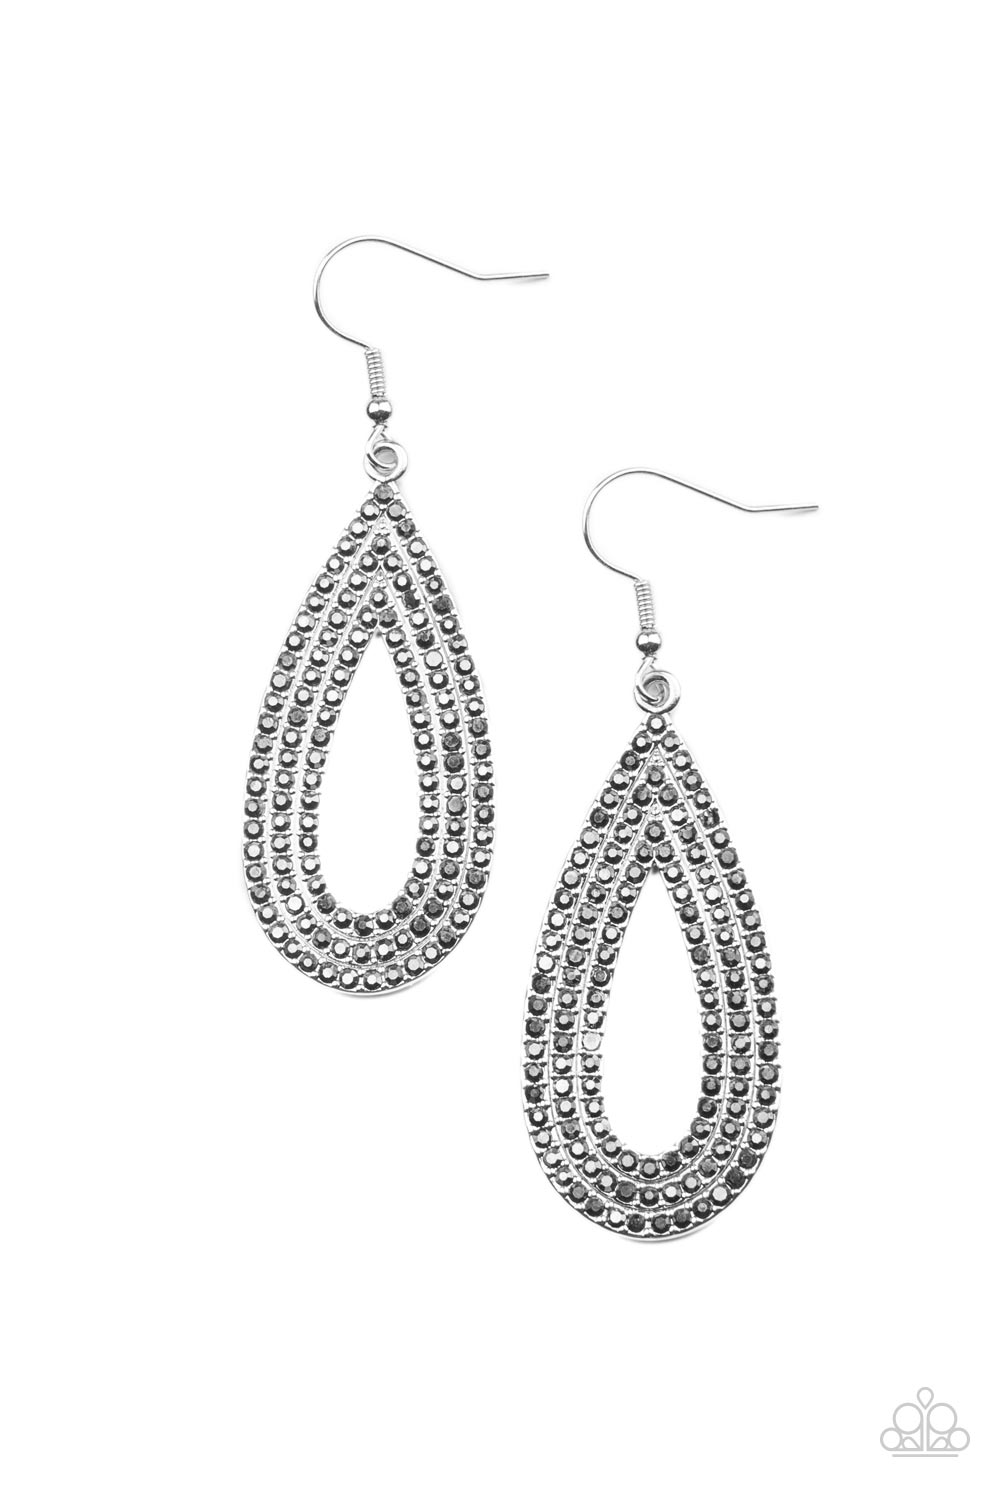 Exquisite Exaggeration Paparazzi Accessories Earrings Silver